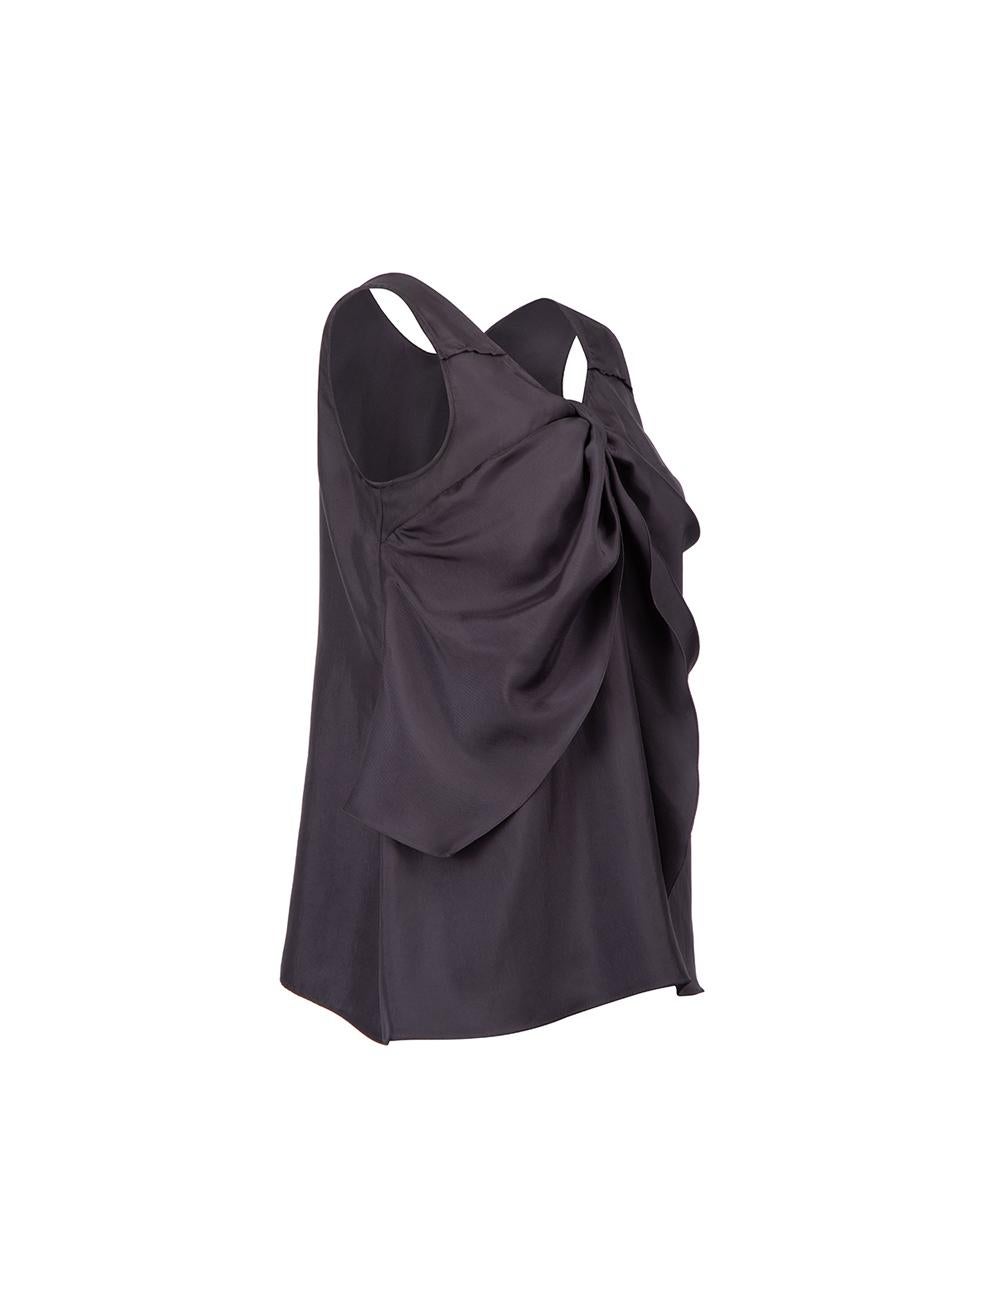 CONDITION is Very good. Hardly any visible wear to top is evident on this used Miu Miu designer resale item. 



Details


Purple

Polyester

Sleeveless tank top

Drape bow accent

V neckline

Back keyhole neckline with button closure





Made in